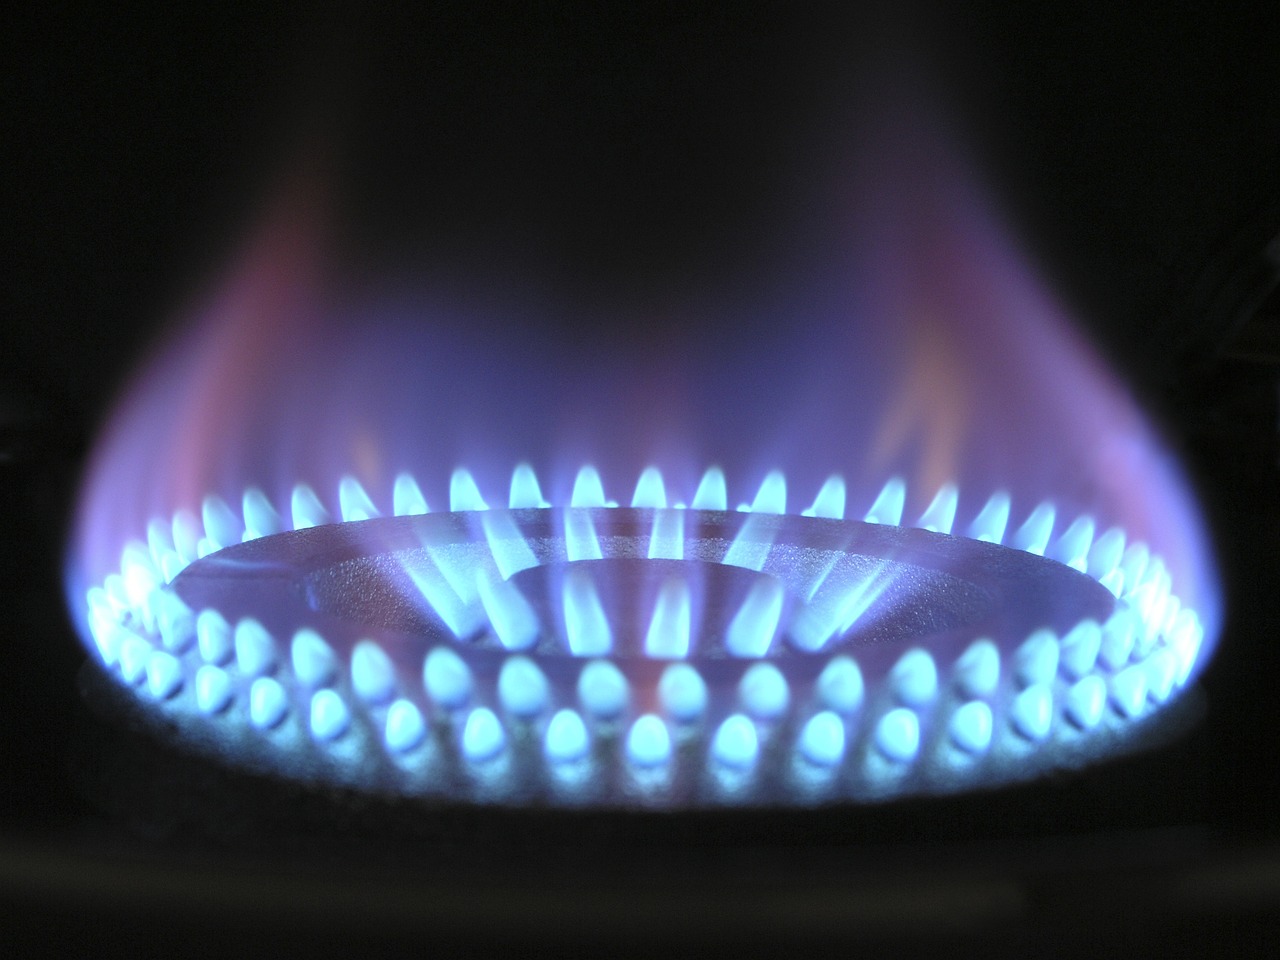 Exit for the gas burner?  The pros and cons